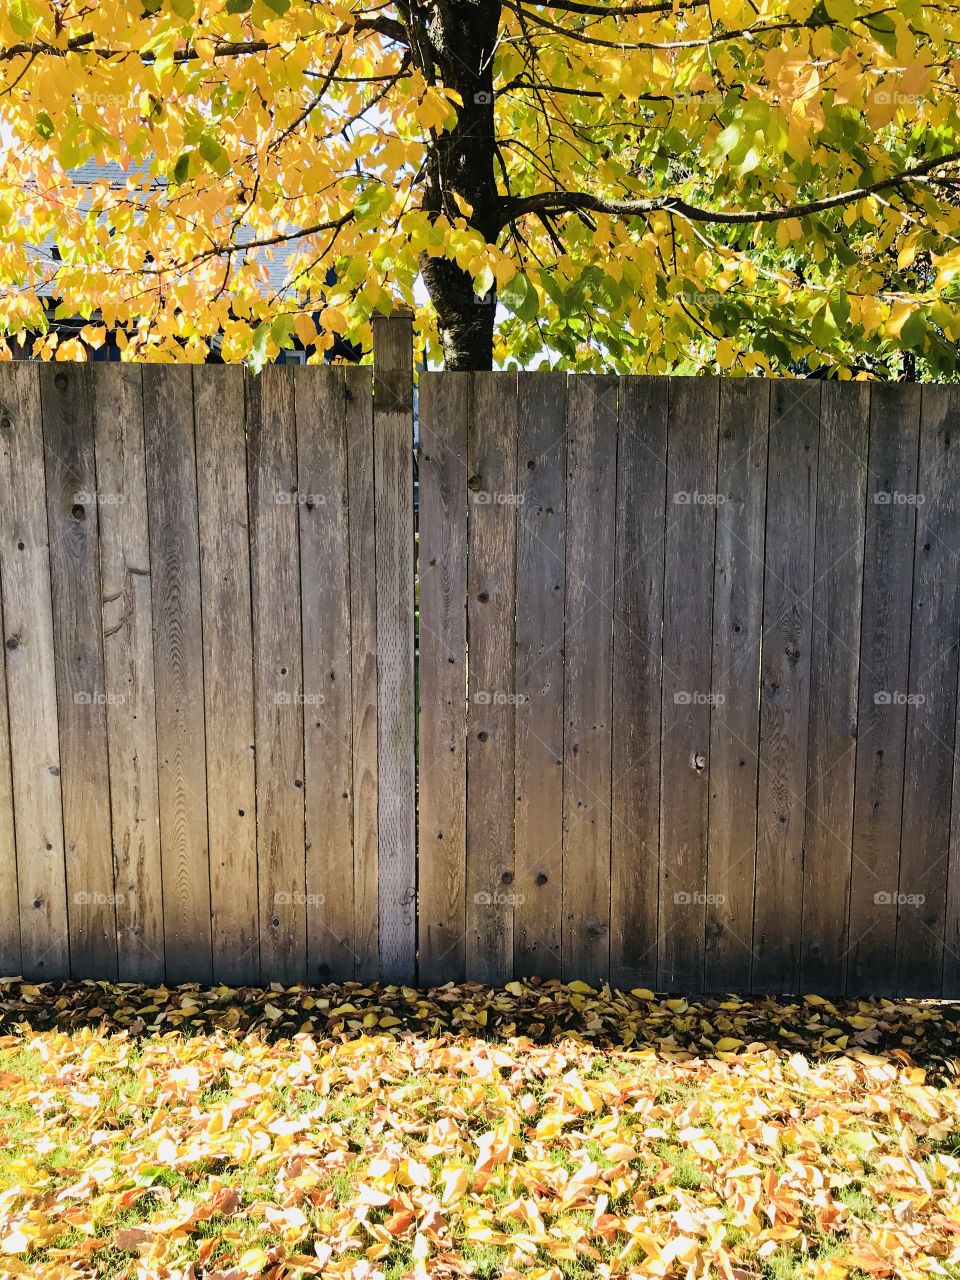 Leaves above and below fence